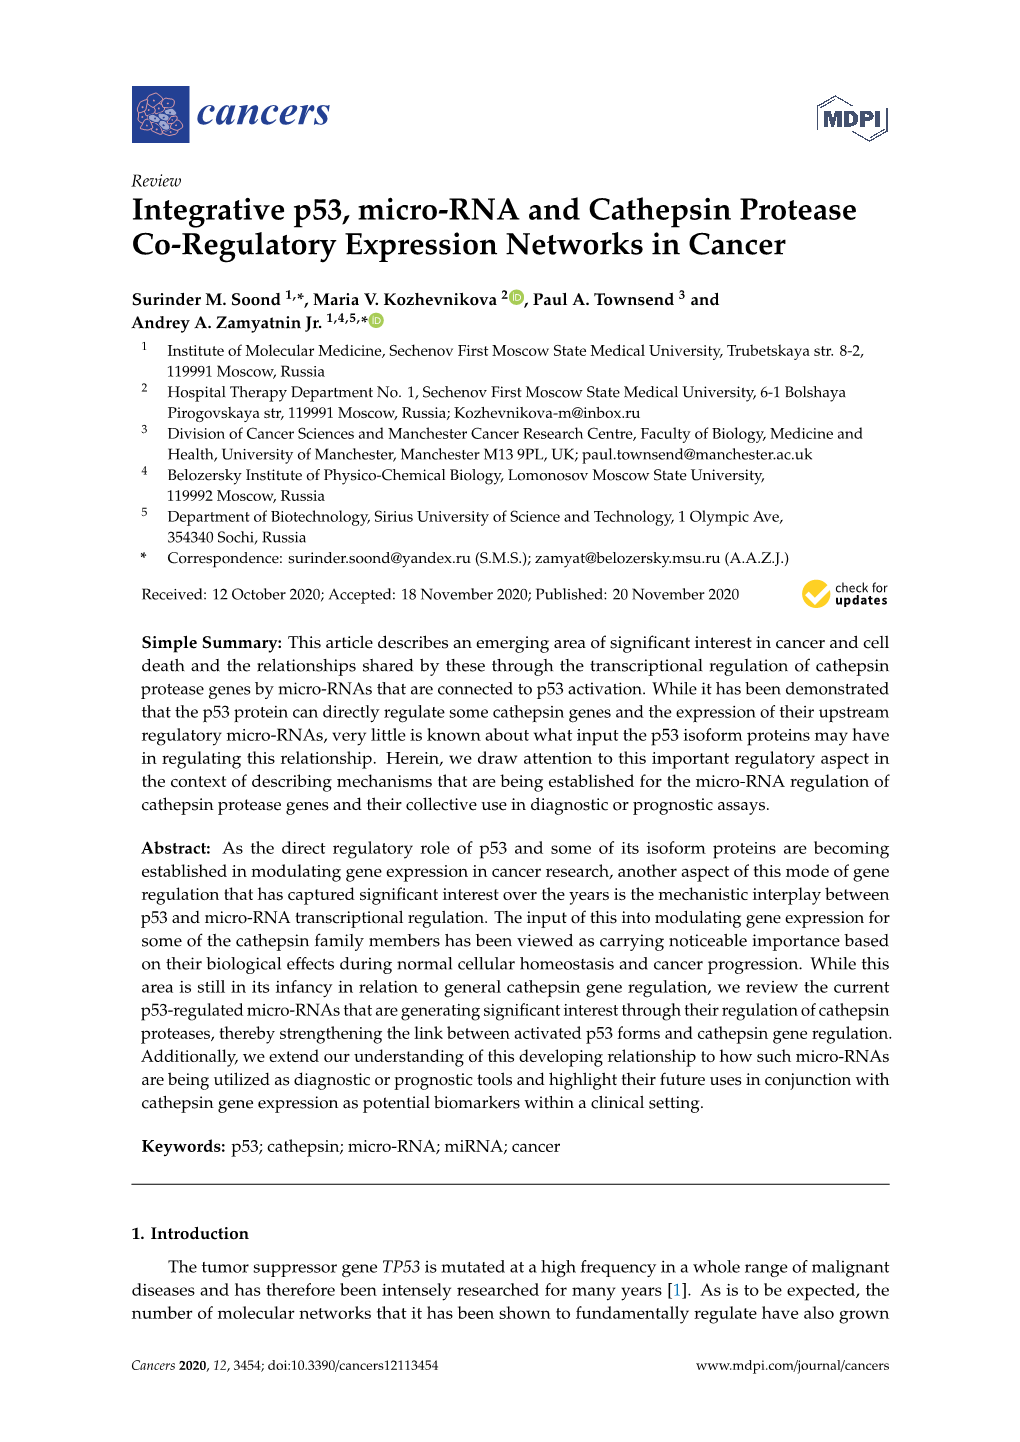 Integrative P53, Micro-RNA and Cathepsin Protease Co-Regulatory Expression Networks in Cancer